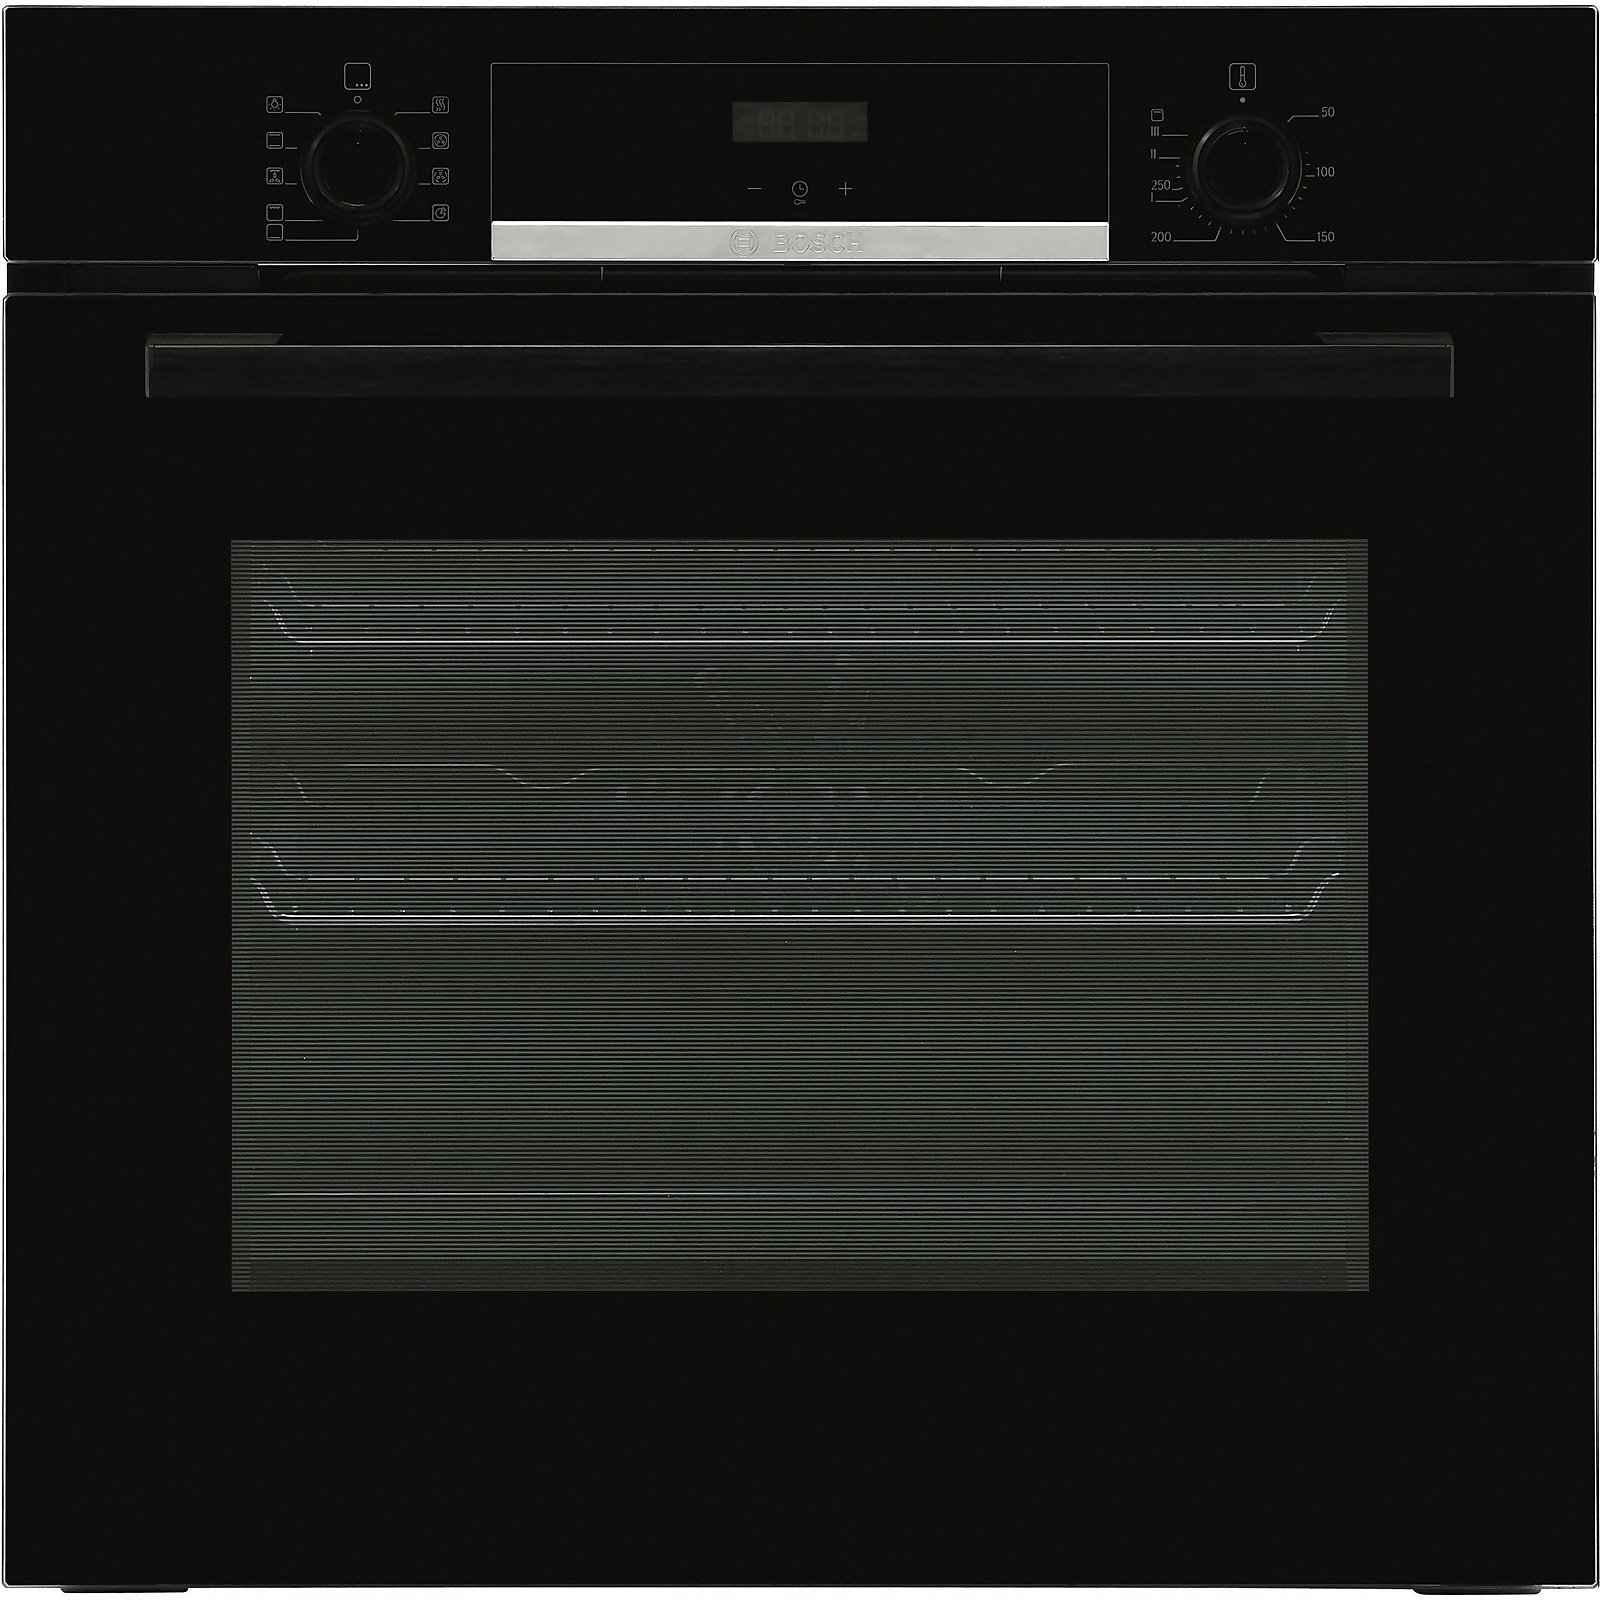 Photo of Bosch Serie 4 Hbs534bb0b Built In Electric Single Oven - Black